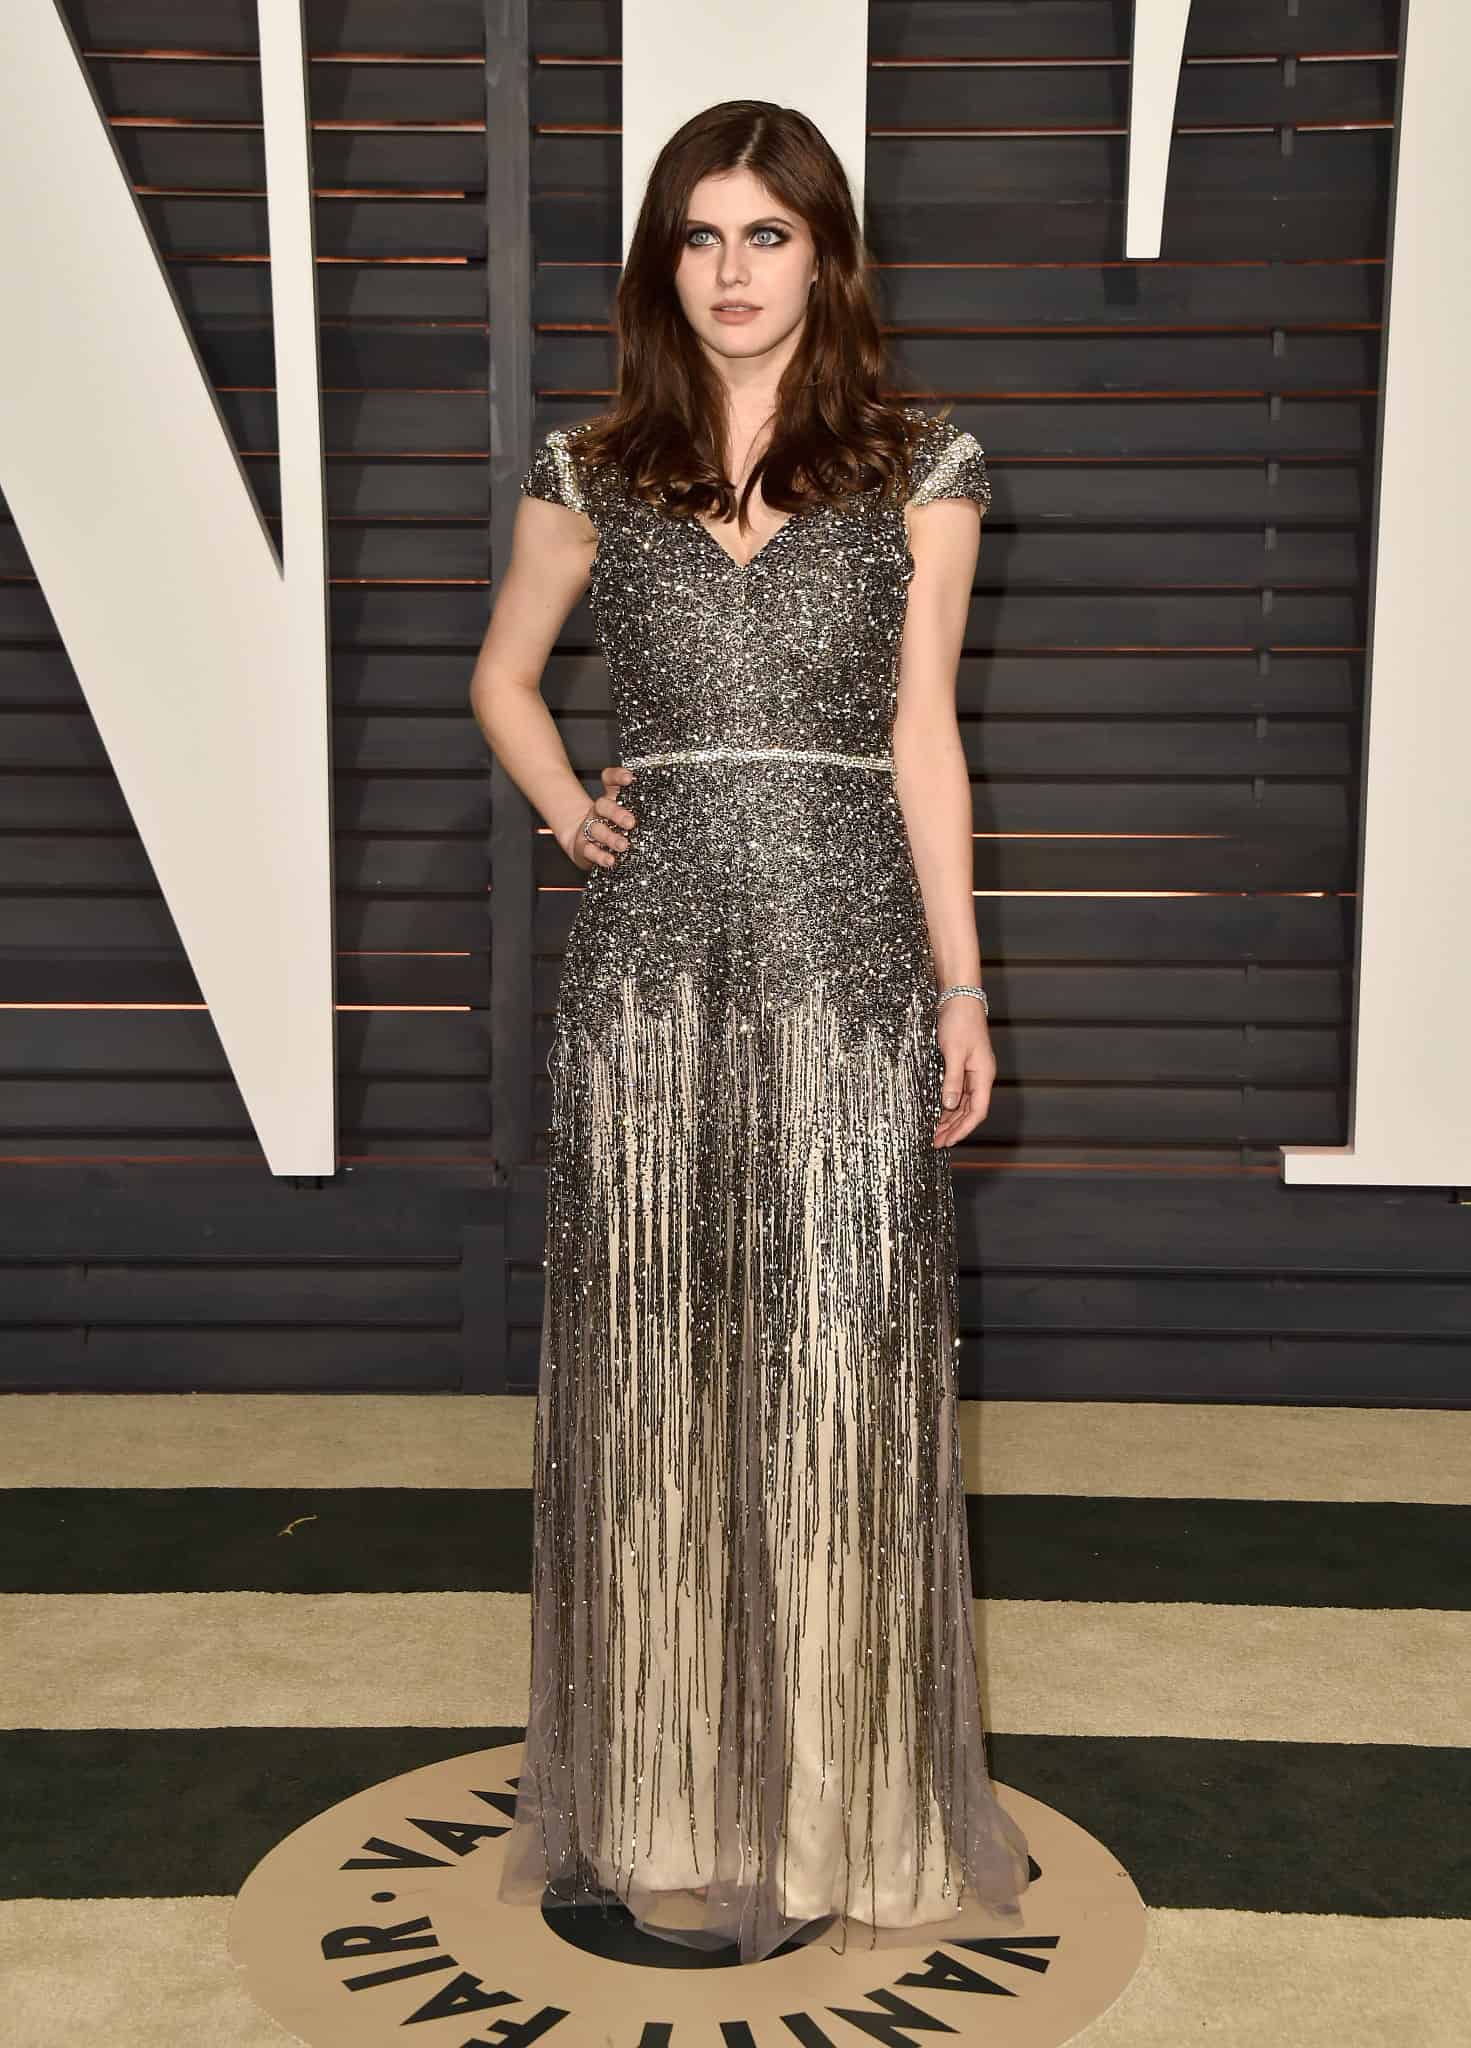 Alexandra Daddario Looked Spectacular in a Beaded Gold Dress at the Oscars